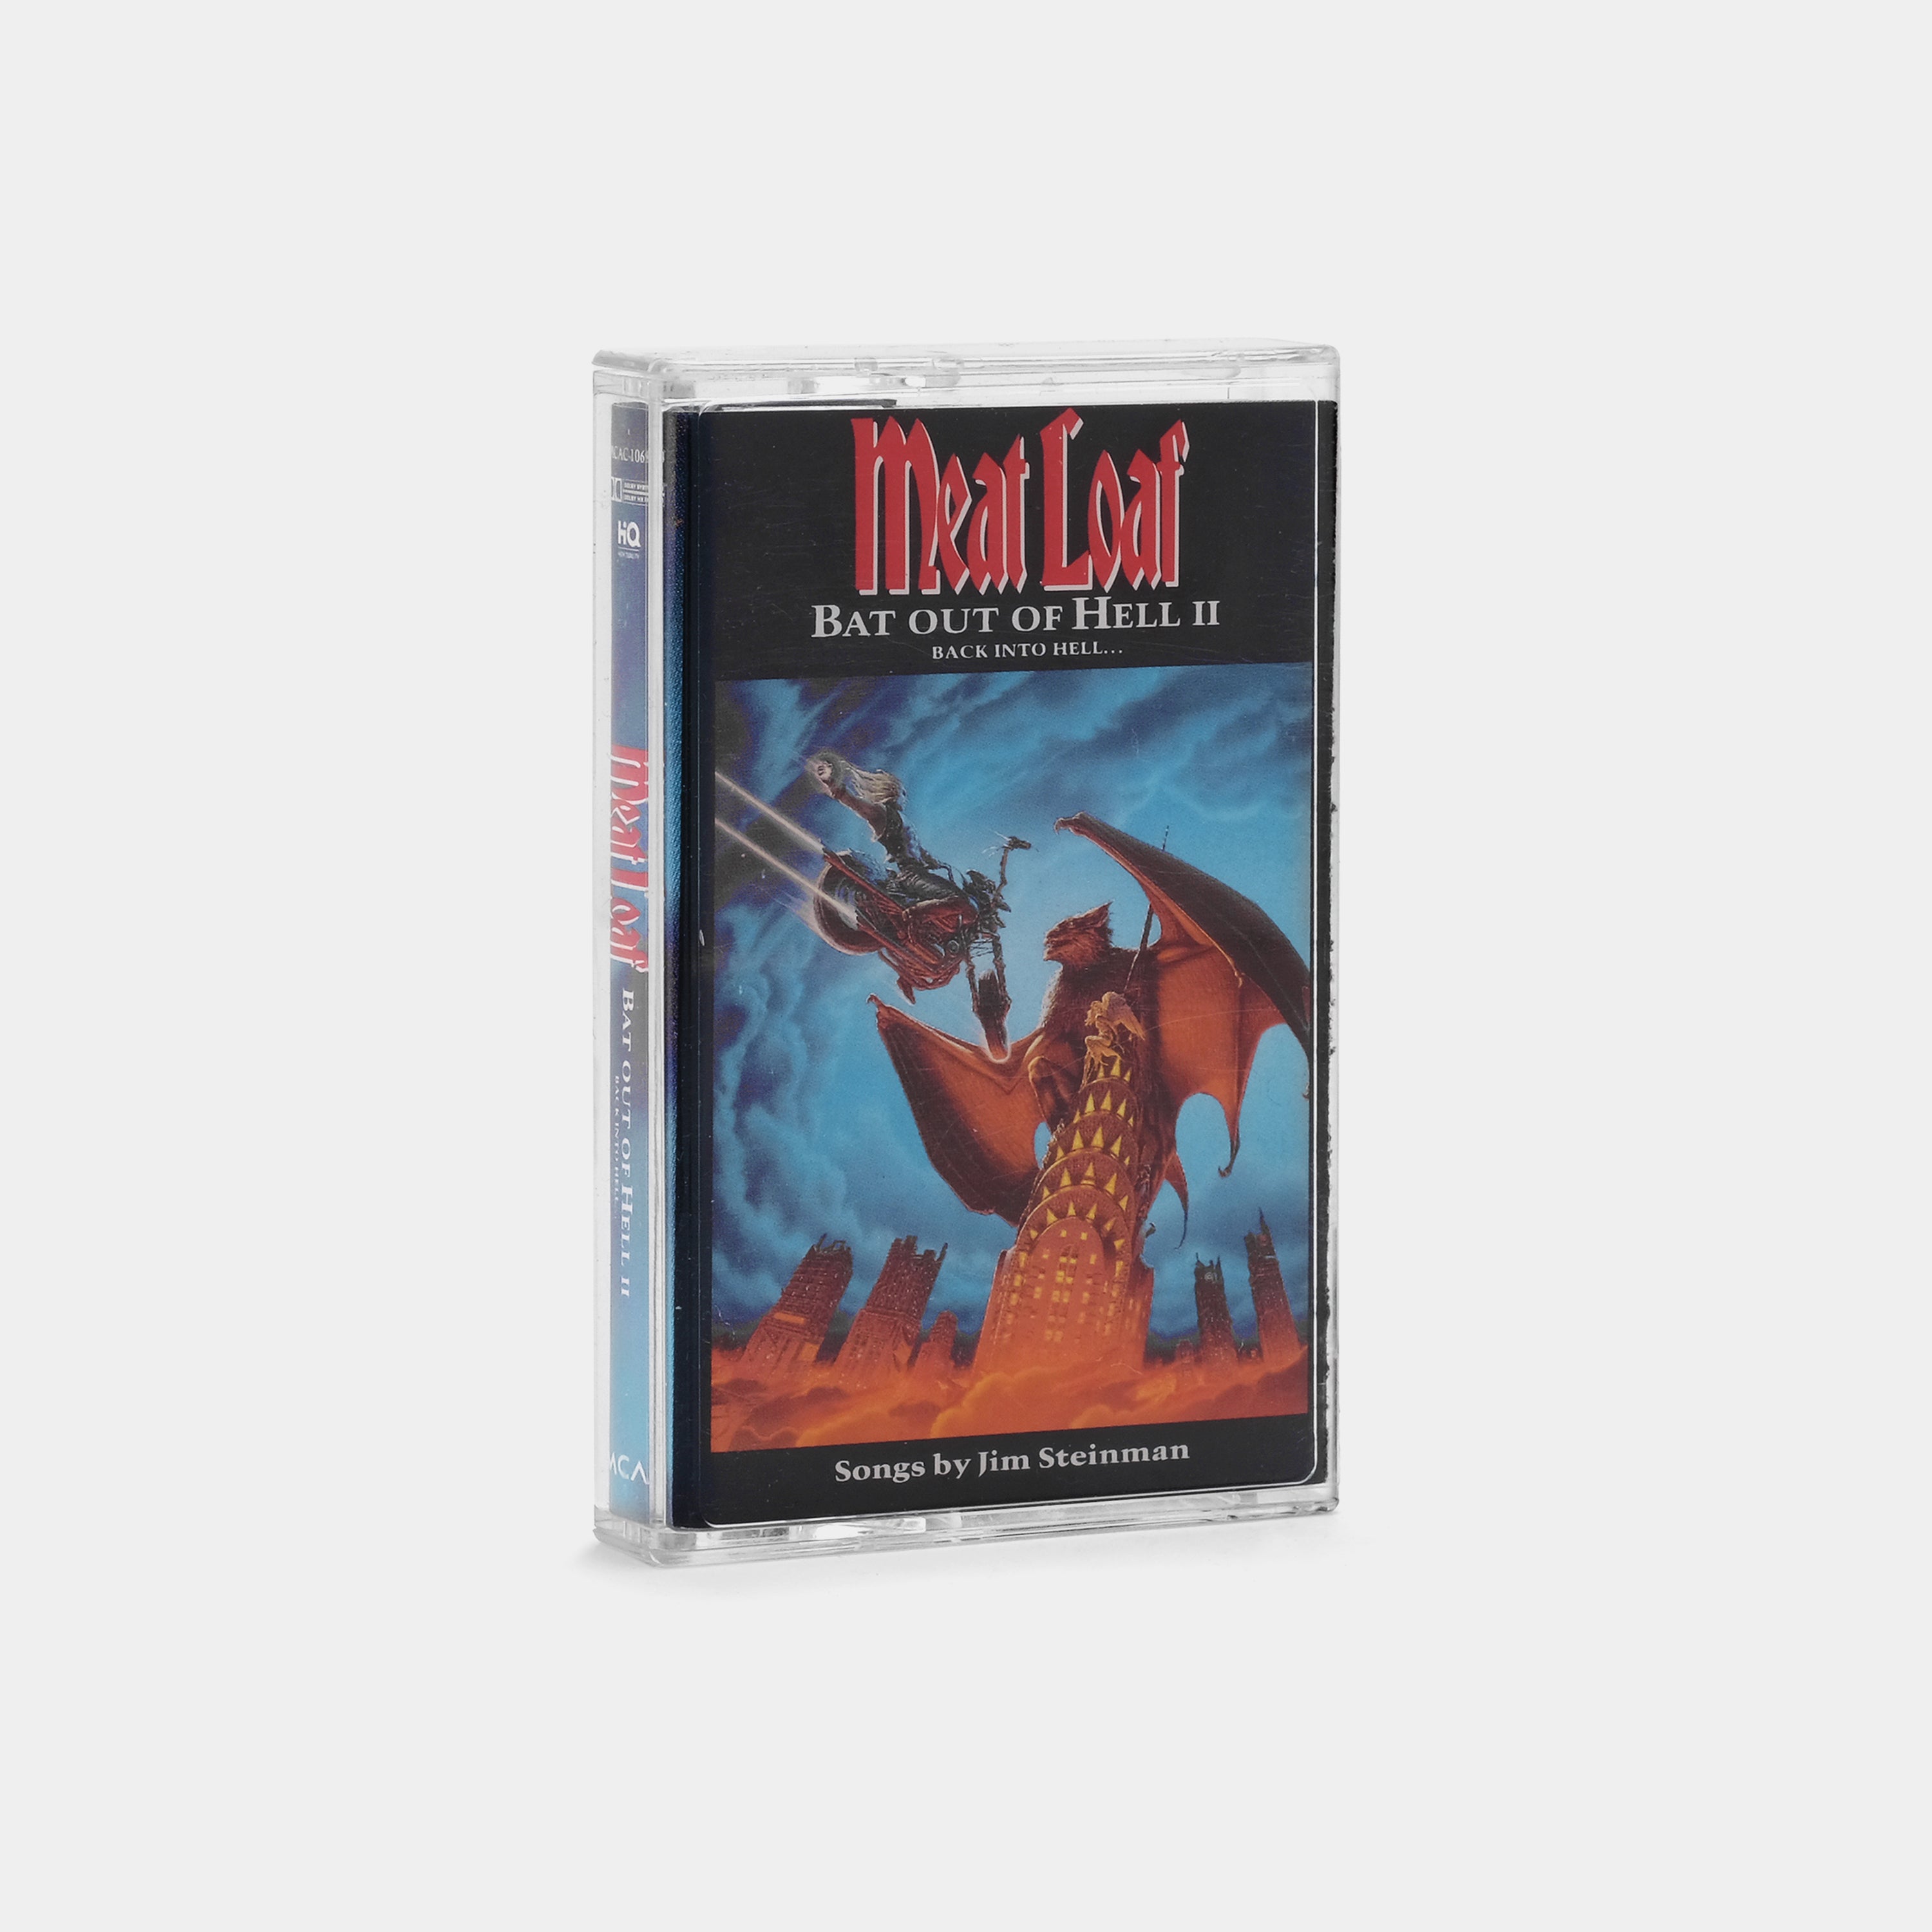 Meat Loaf - Bat Out Of Hell II: Back Into Hell Cassette Tape